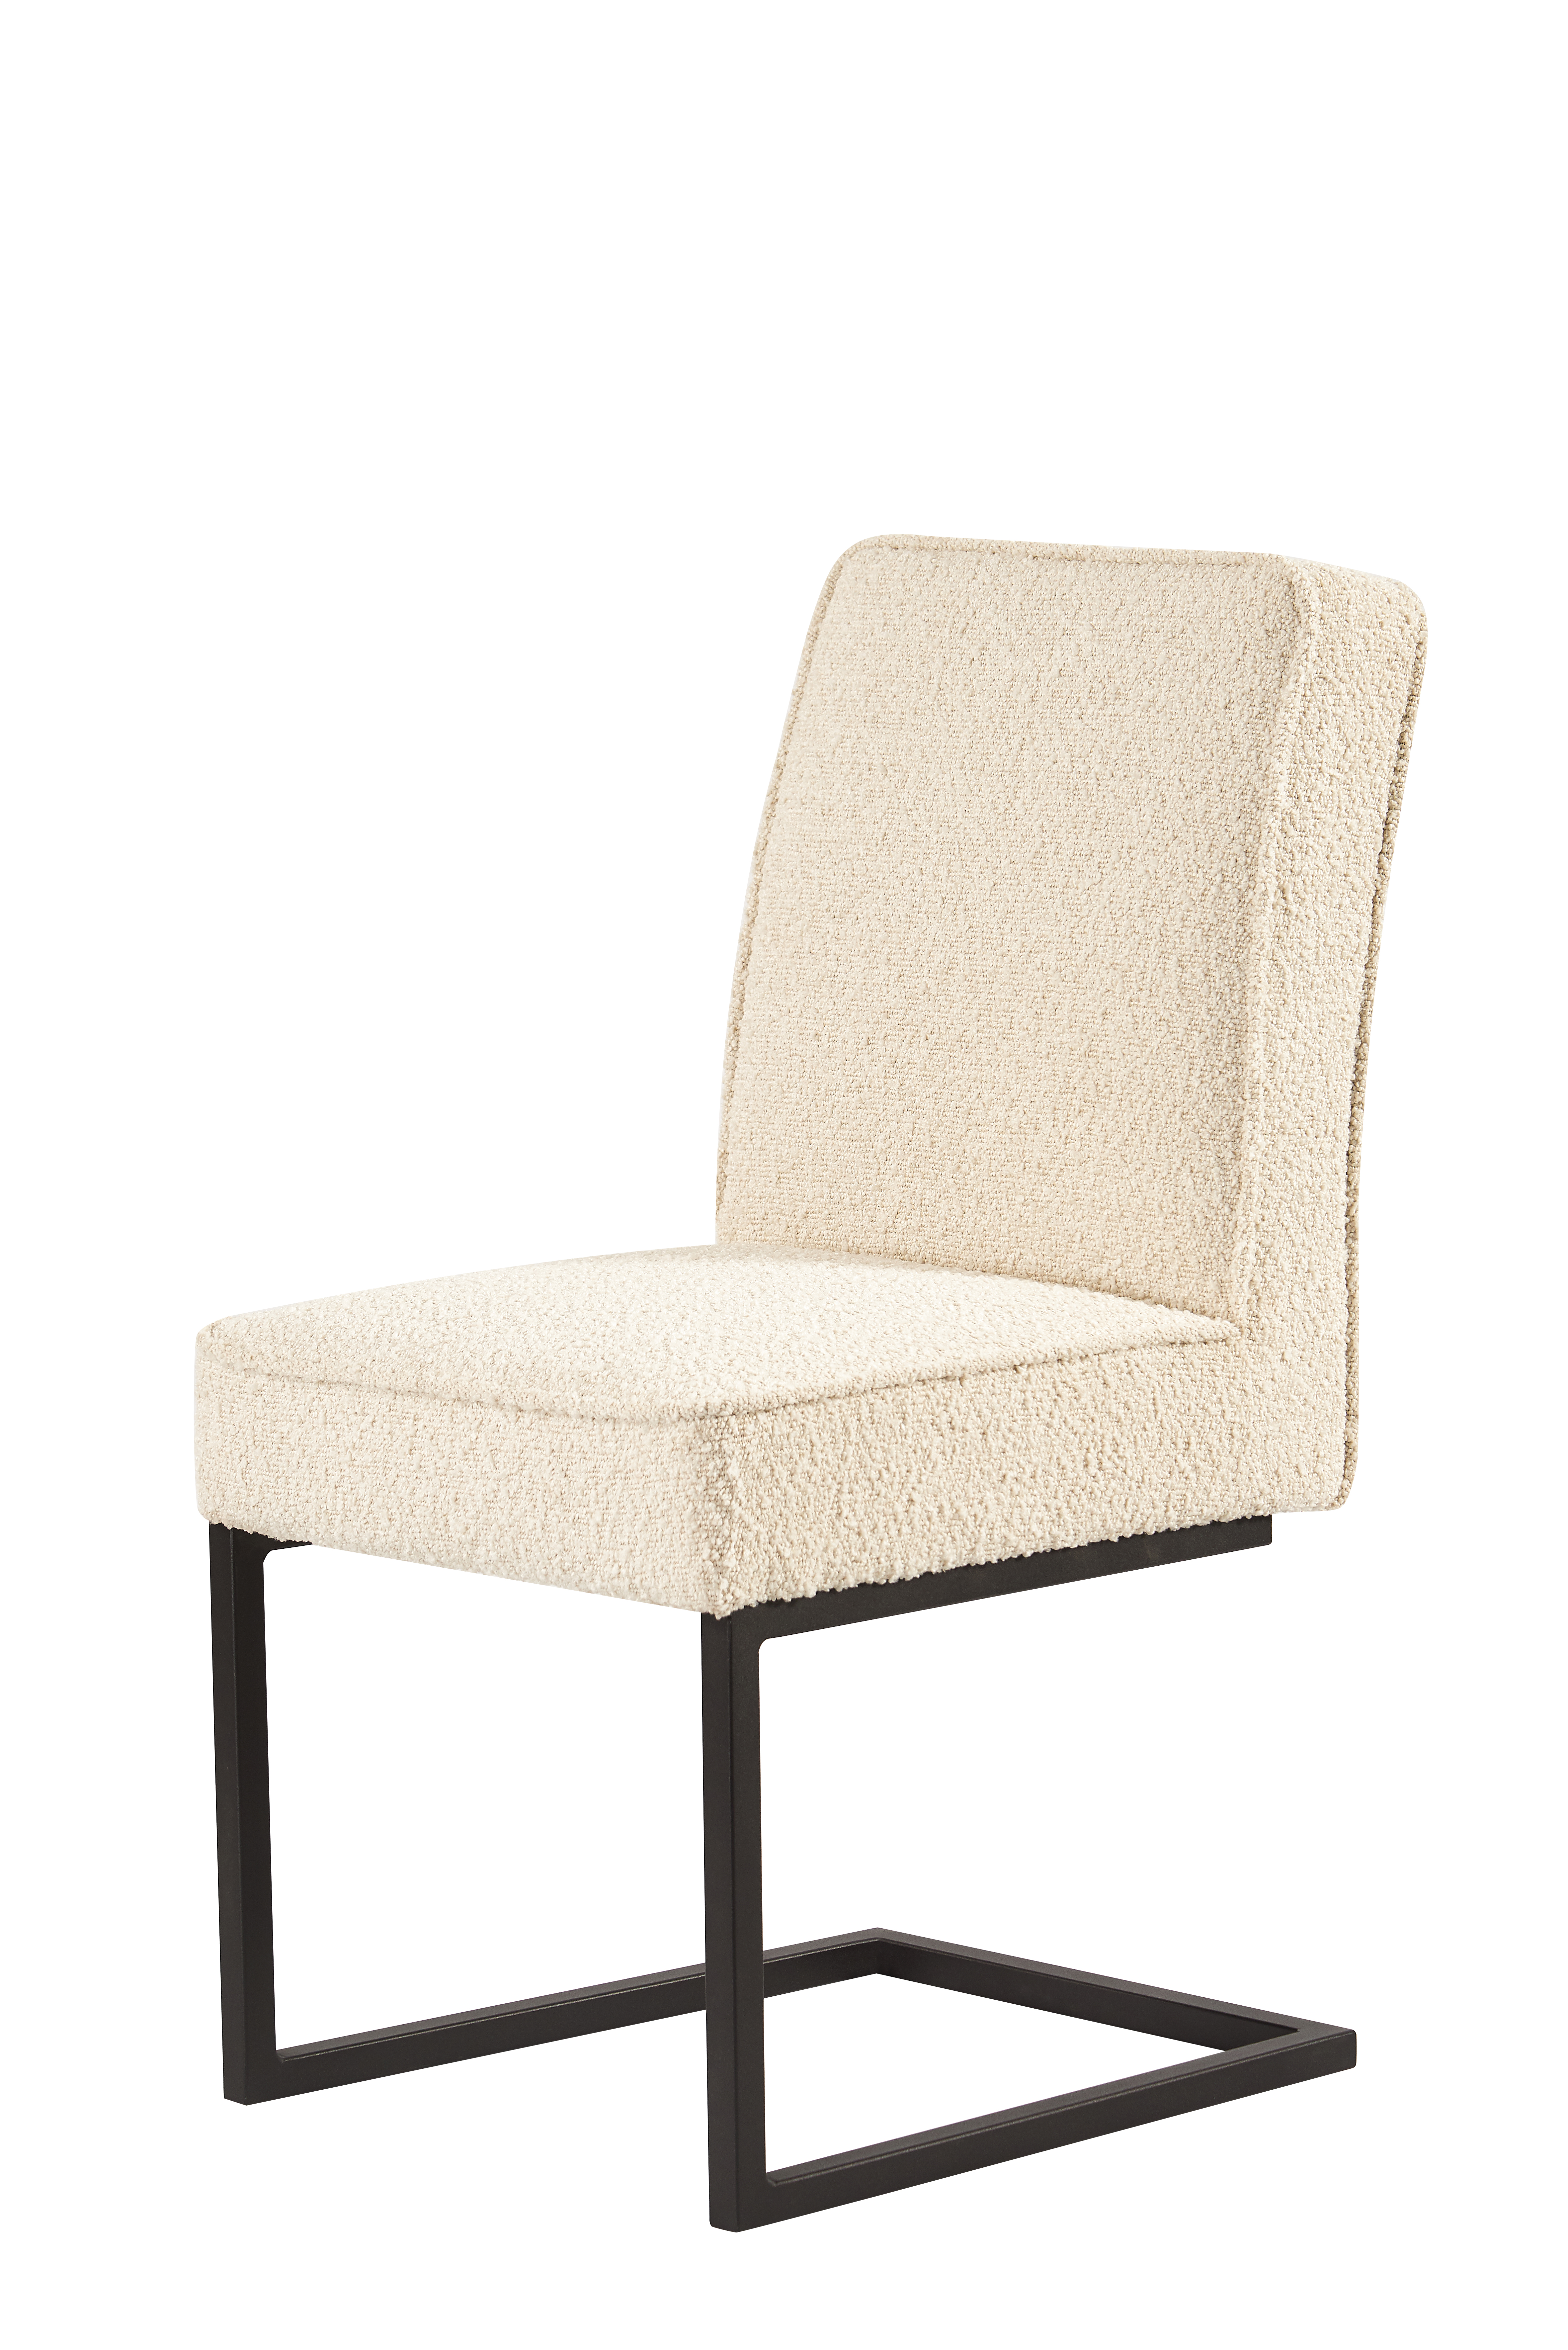 Promotional Dining Chair TC-2151 With Teddy fabric Featured Image